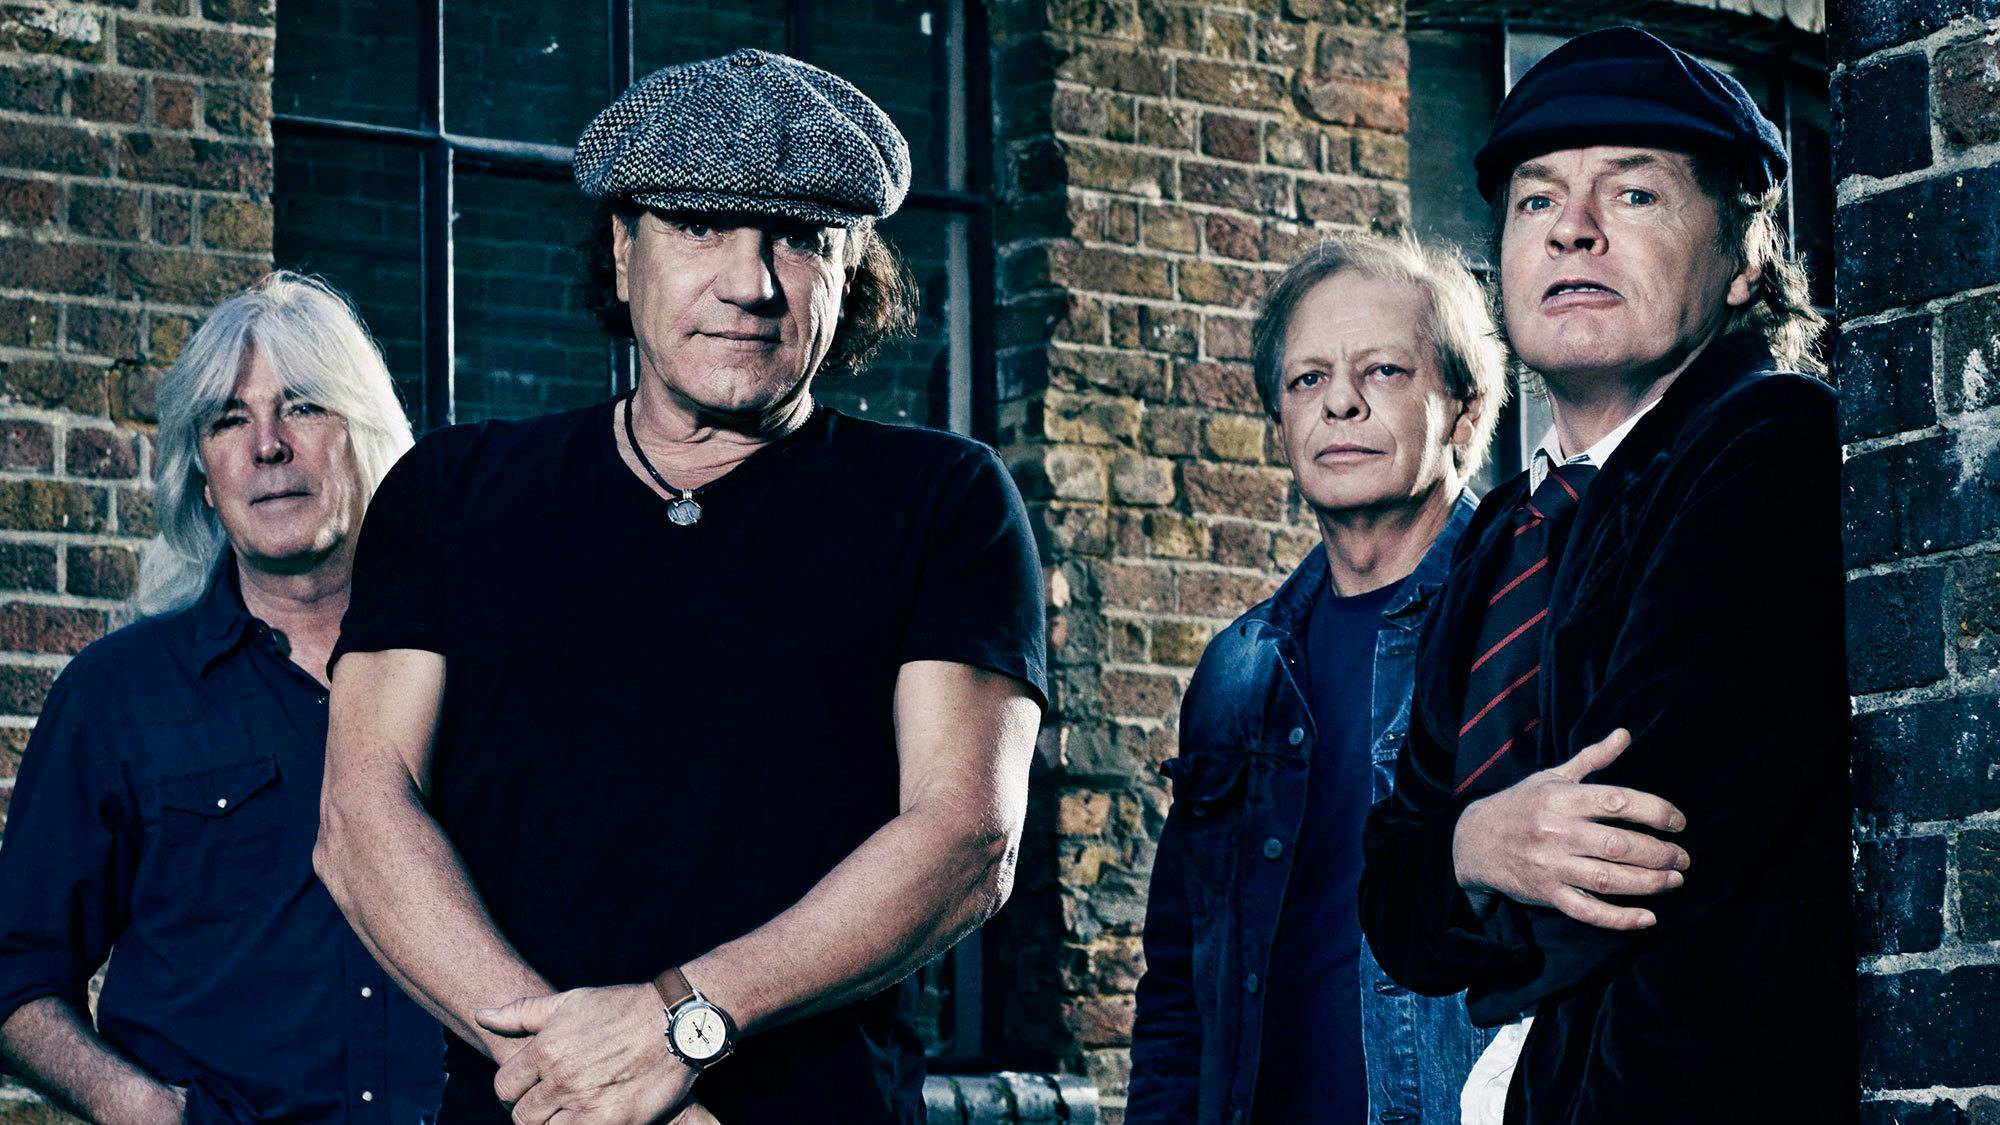 The New AC/DC Album Will Have "Some Surprises" Regarding Malcolm Young